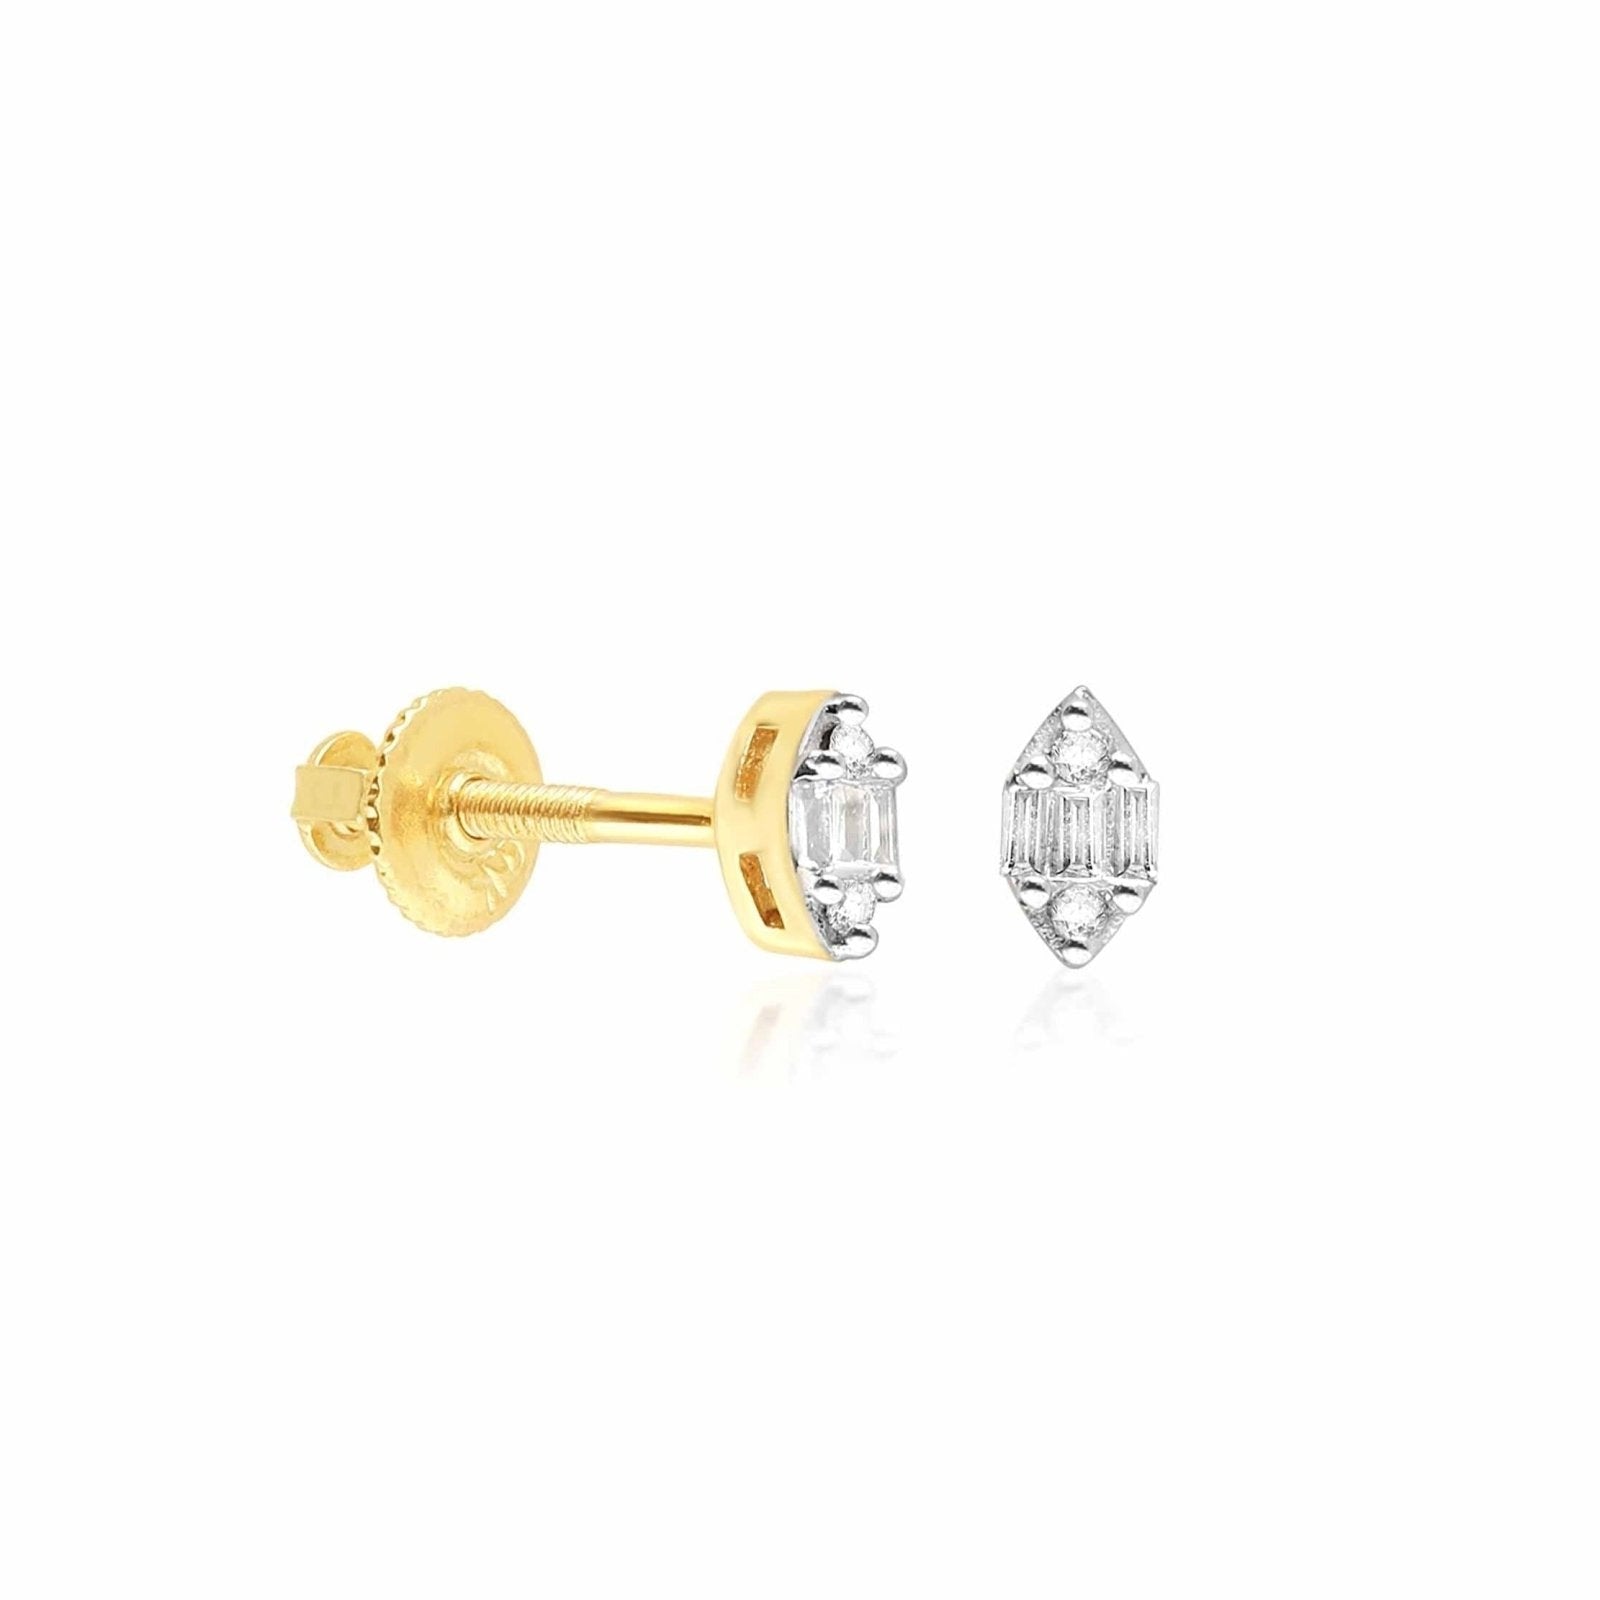 Marquise Mixed Diamond Screw Back Earrings Earrings Estella Collection #product_description# 14k Birthstone Birthstone Earrings #tag4# #tag5# #tag6# #tag7# #tag8# #tag9# #tag10#